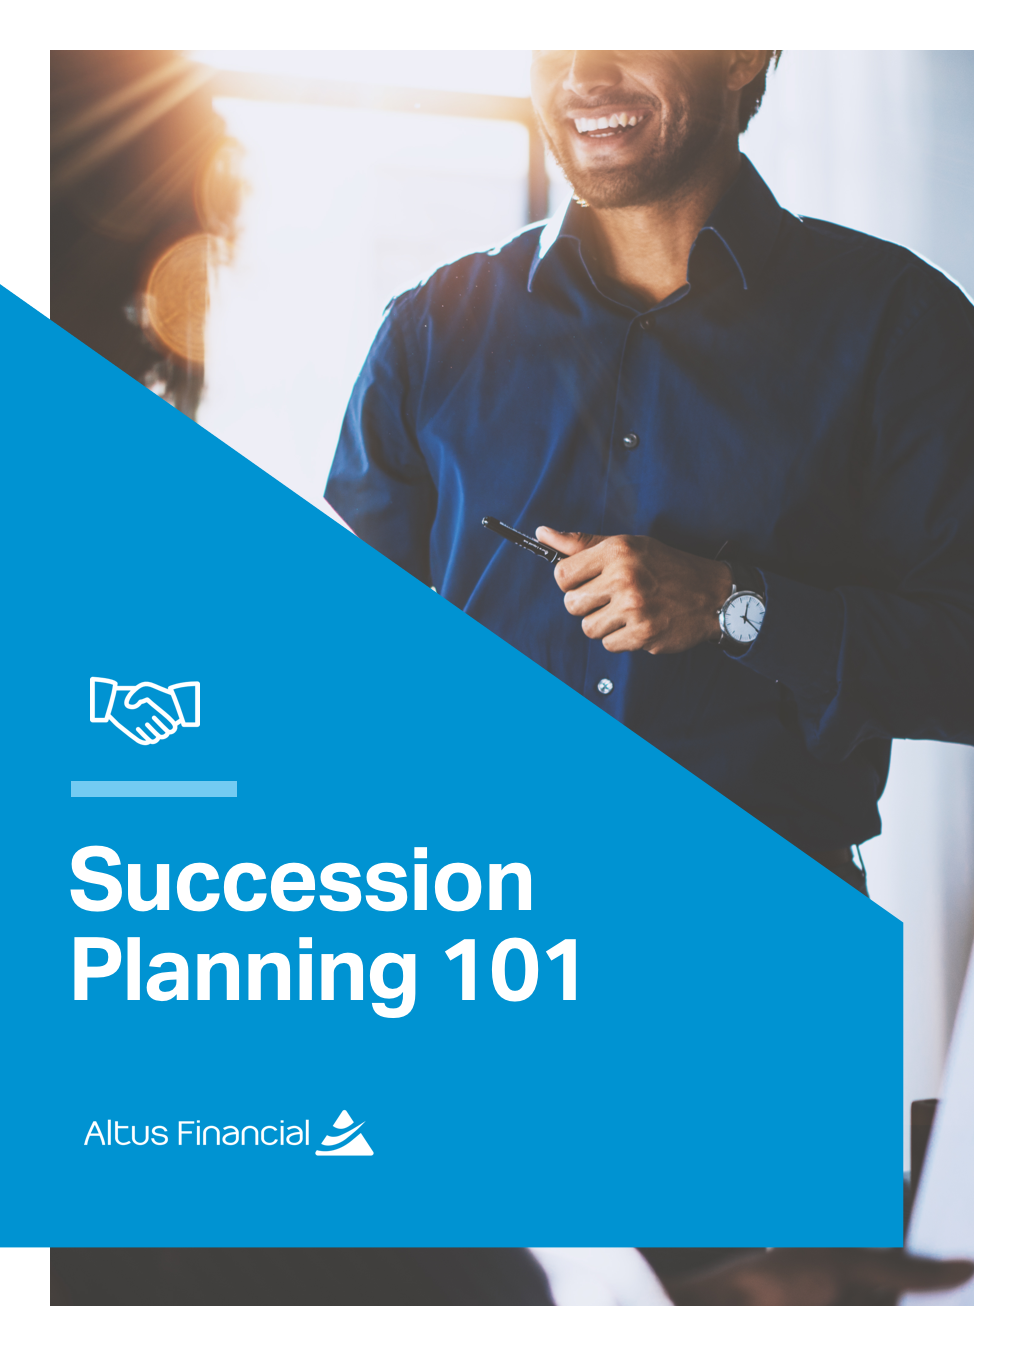 Succession Planning - The Complete Guide